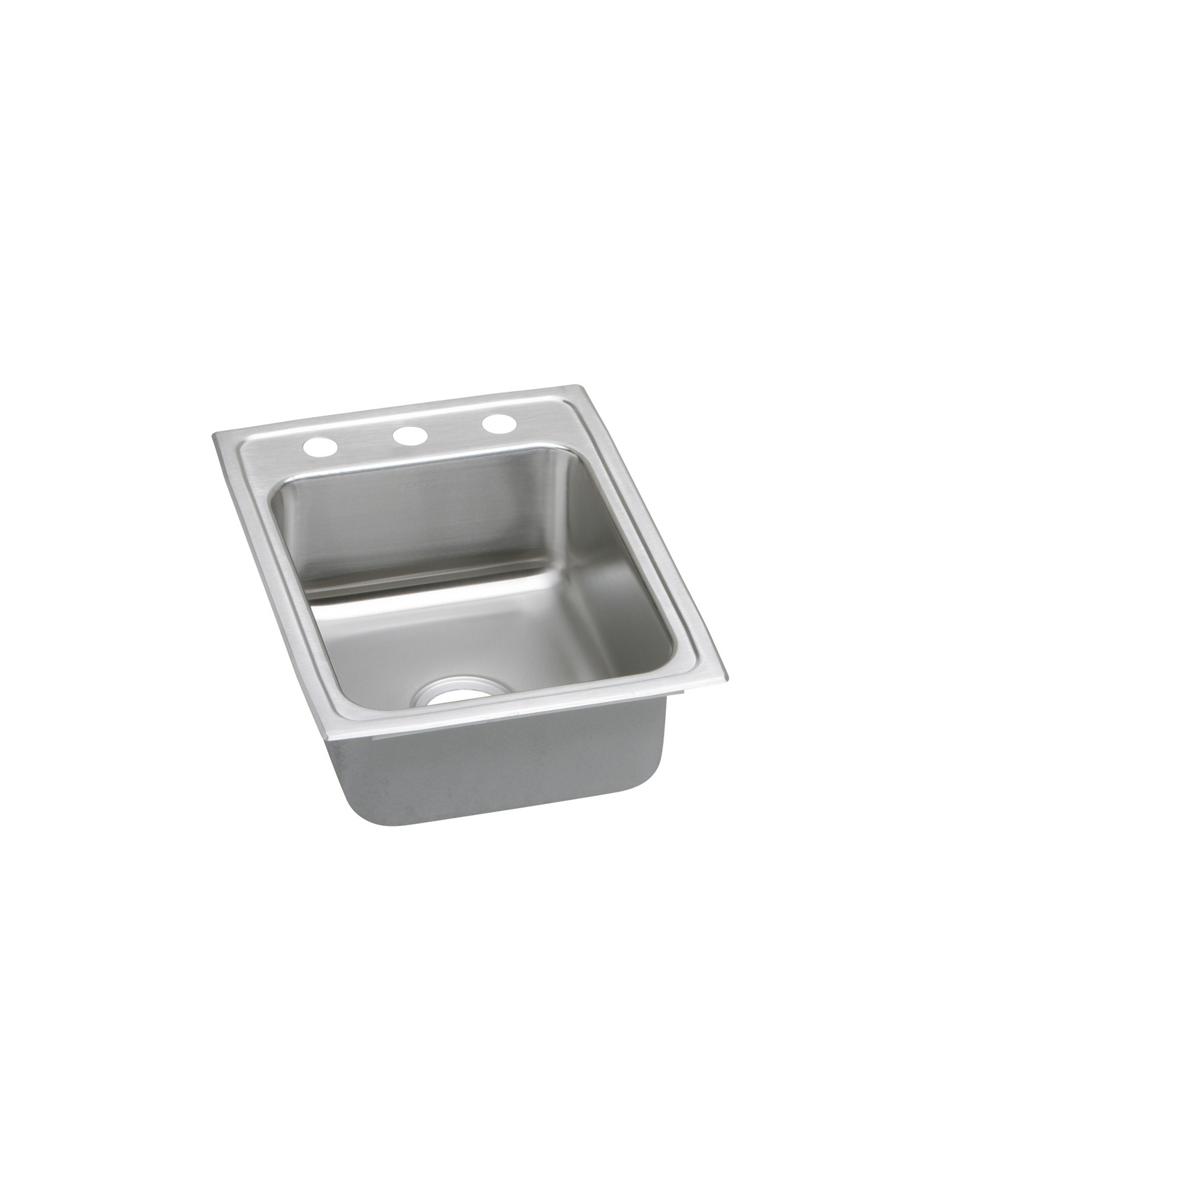 Elkay Lustertone Classic 17" x 22" x 5" Single Bowl Drop-in ADA Sink with Quick-clip